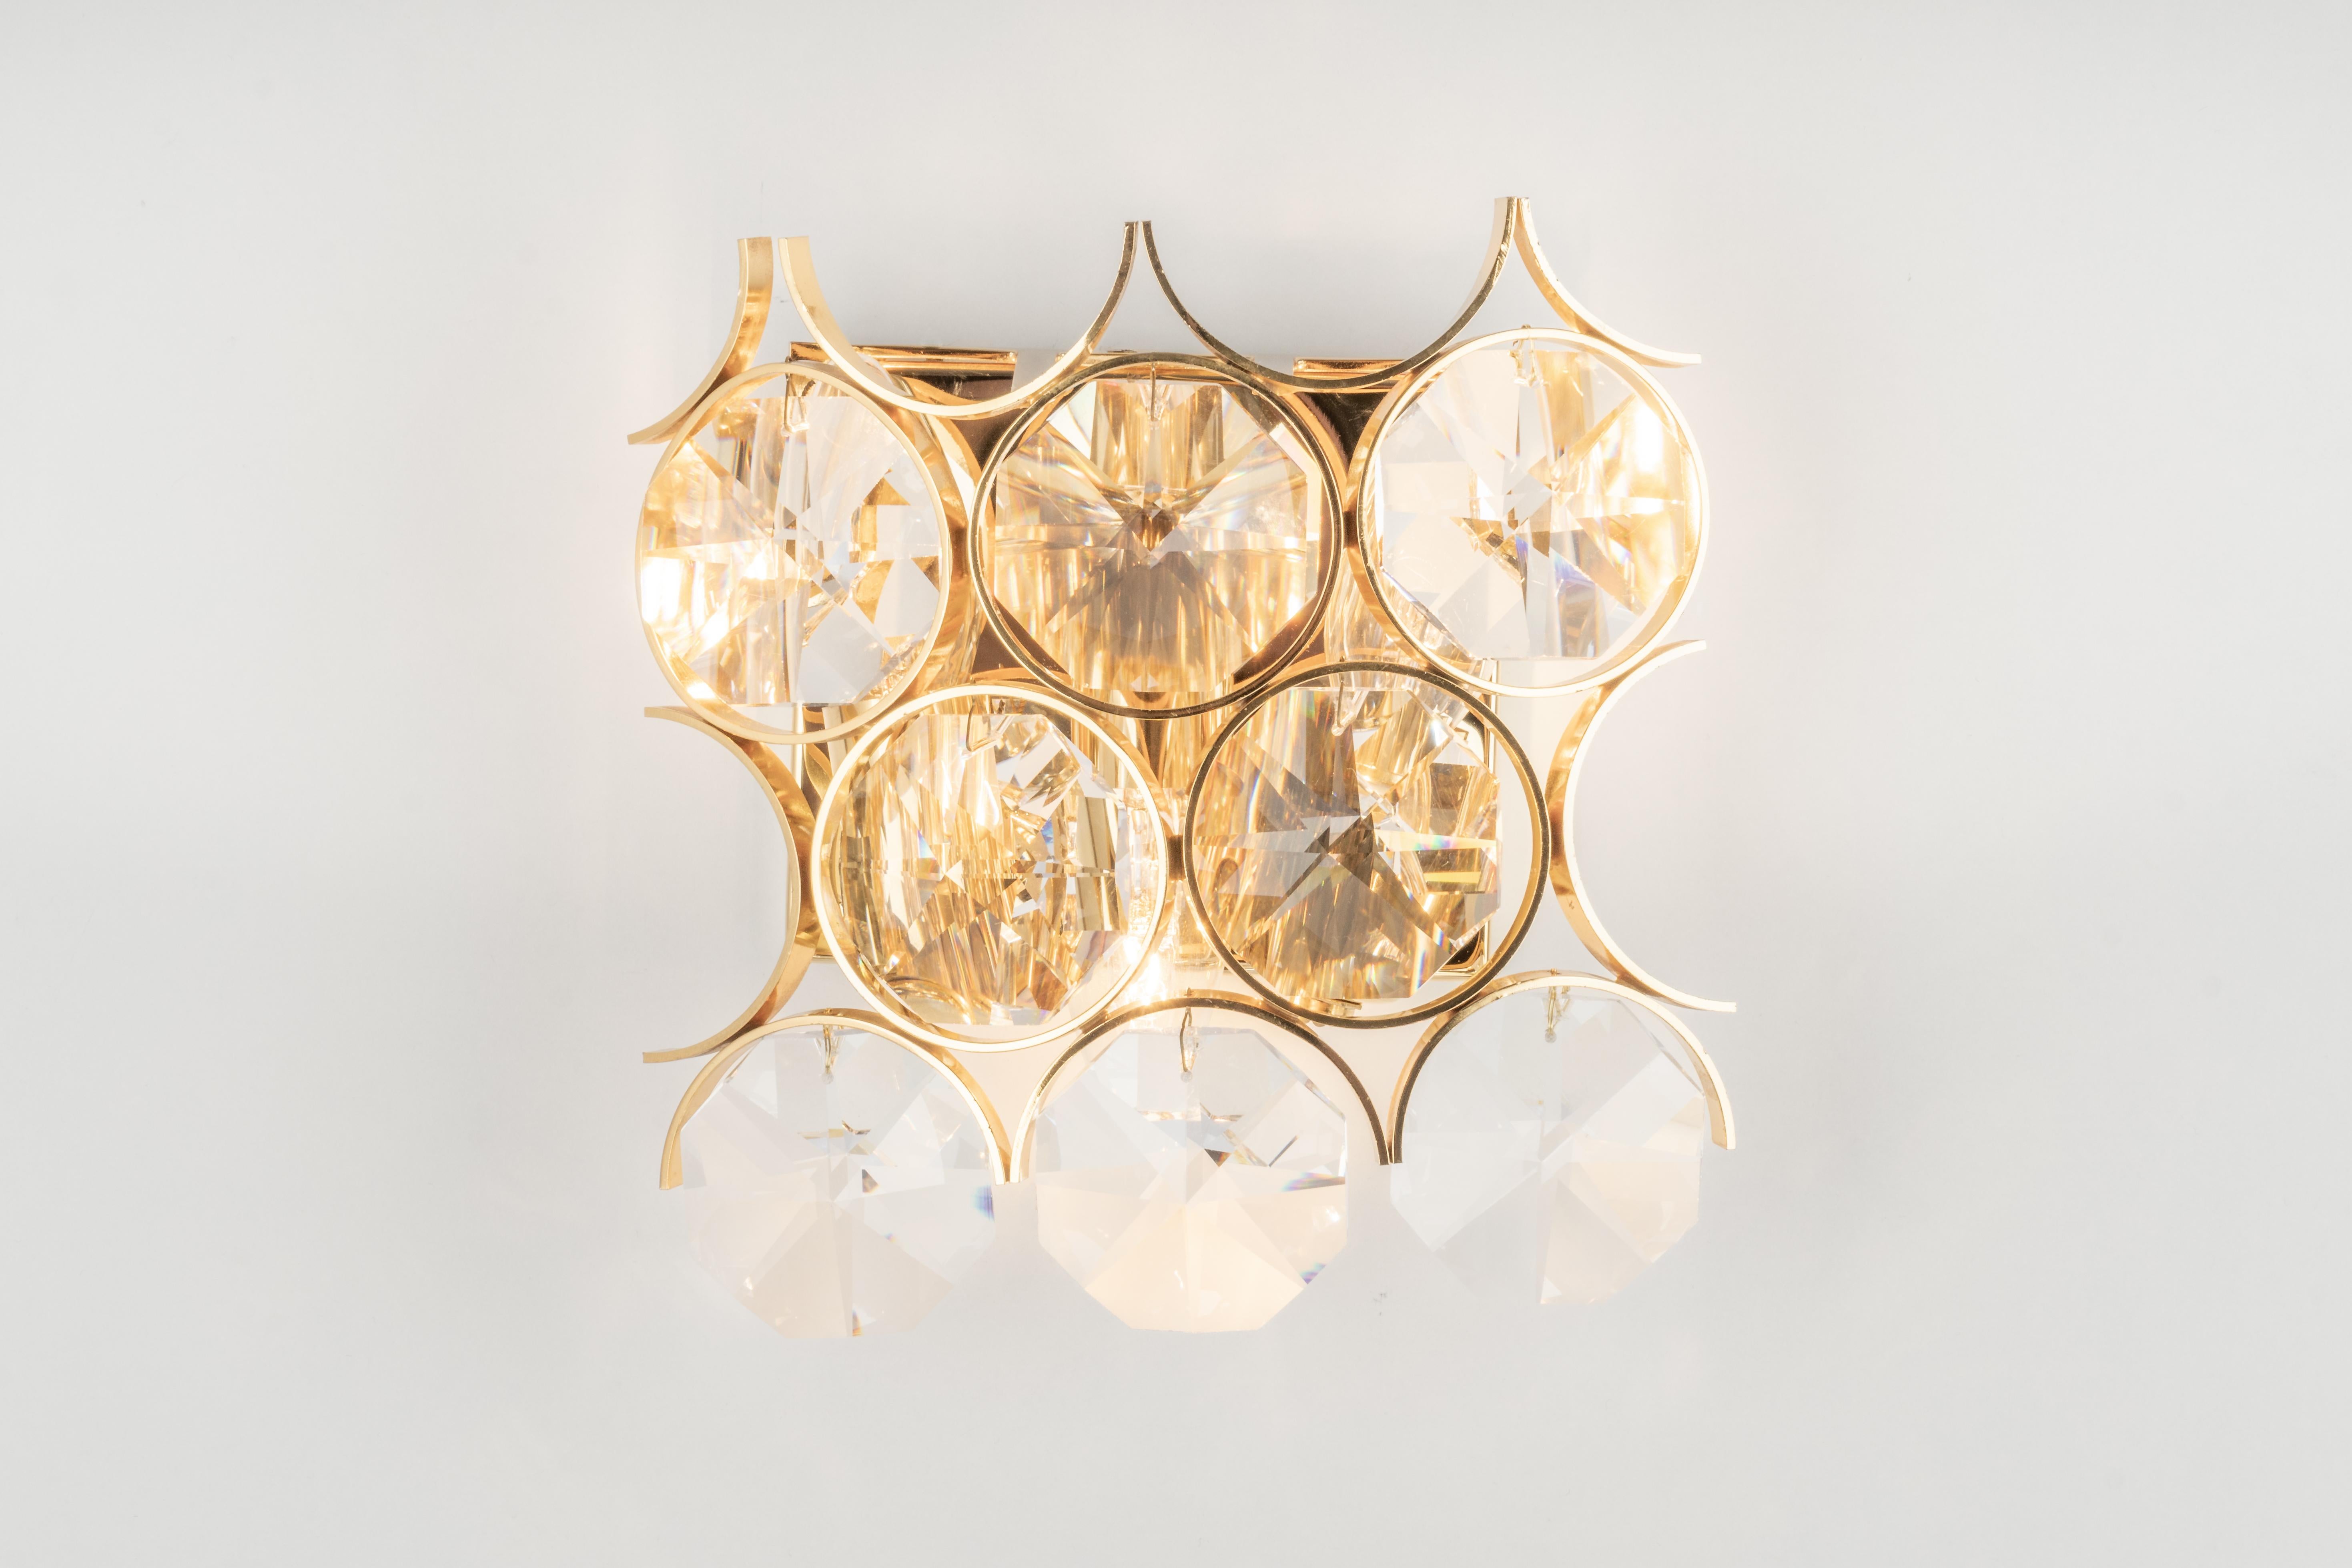 Brass 1 of 2 Pairs of Crystal Wall Lights, Sciolari Design, Palwa, Germany, 1960s For Sale